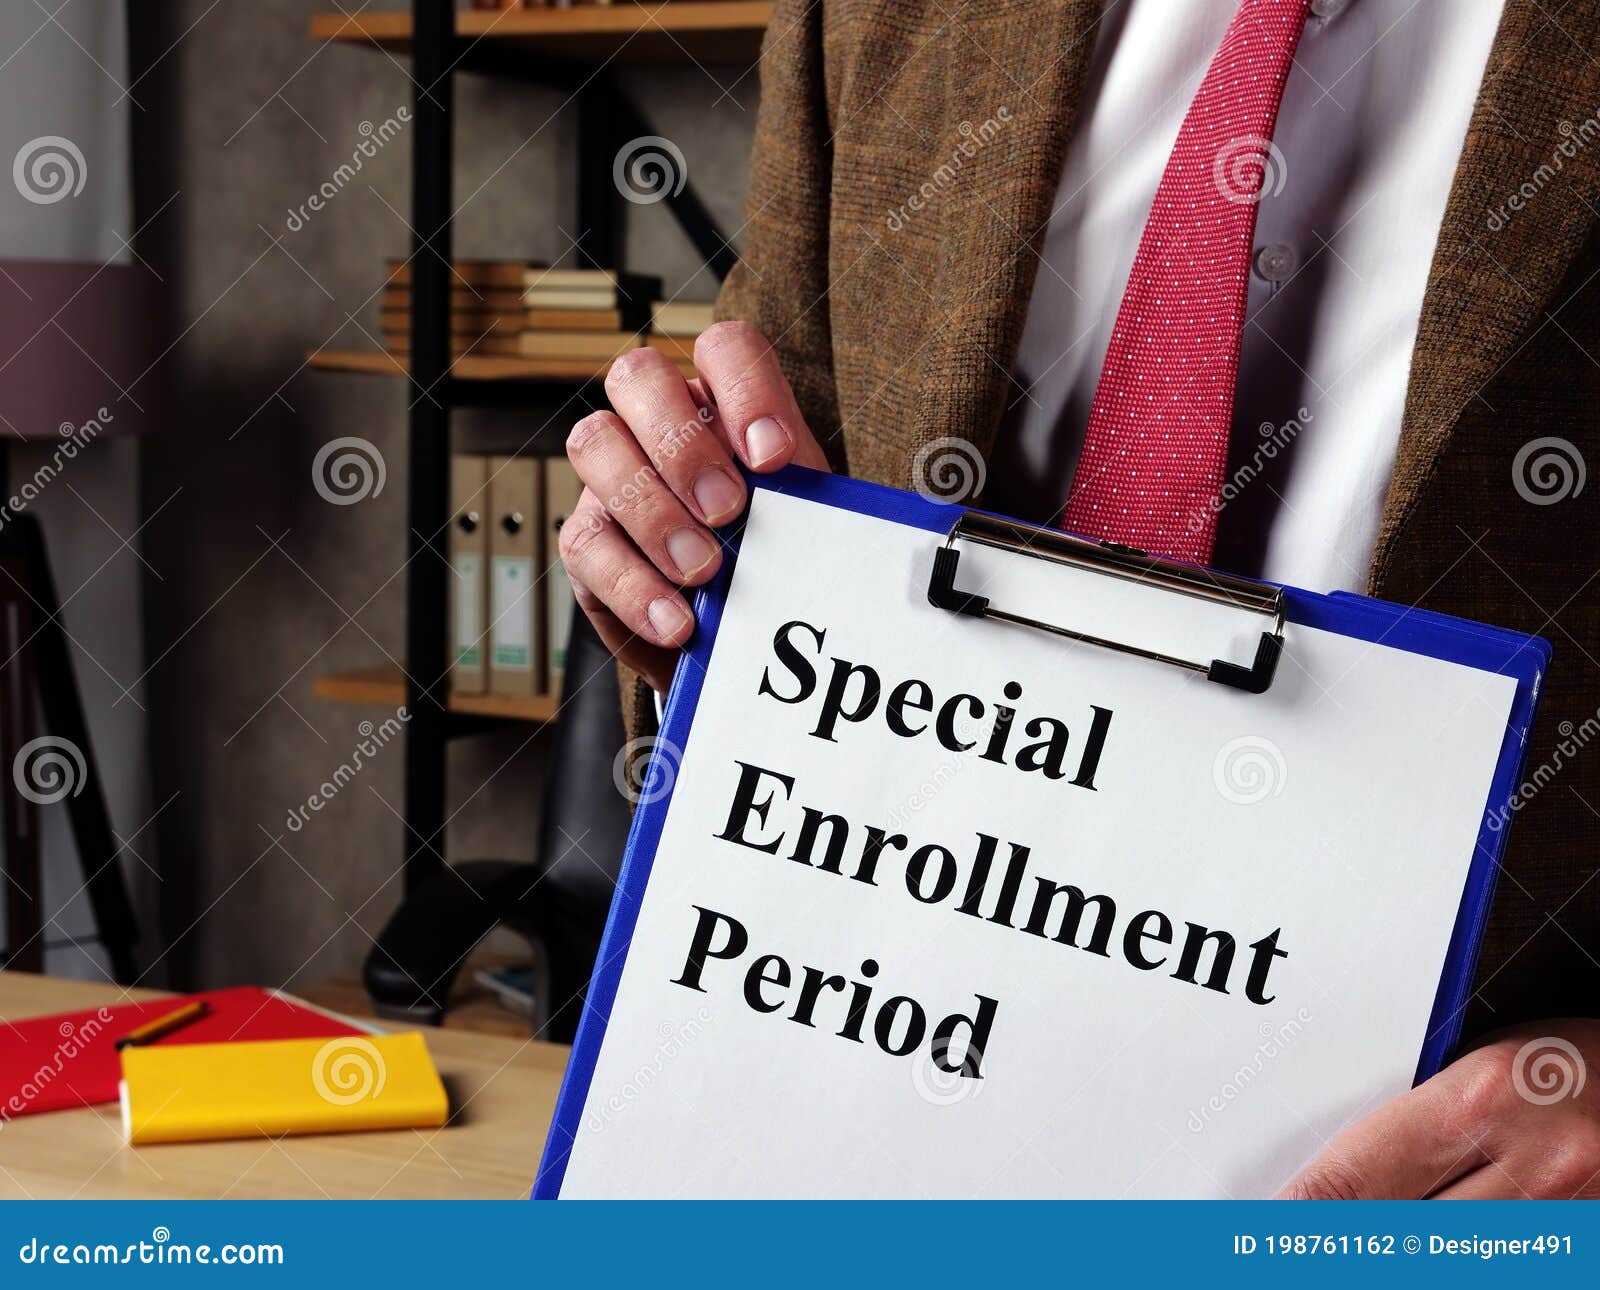 manager explains about the special enrollment period sep.